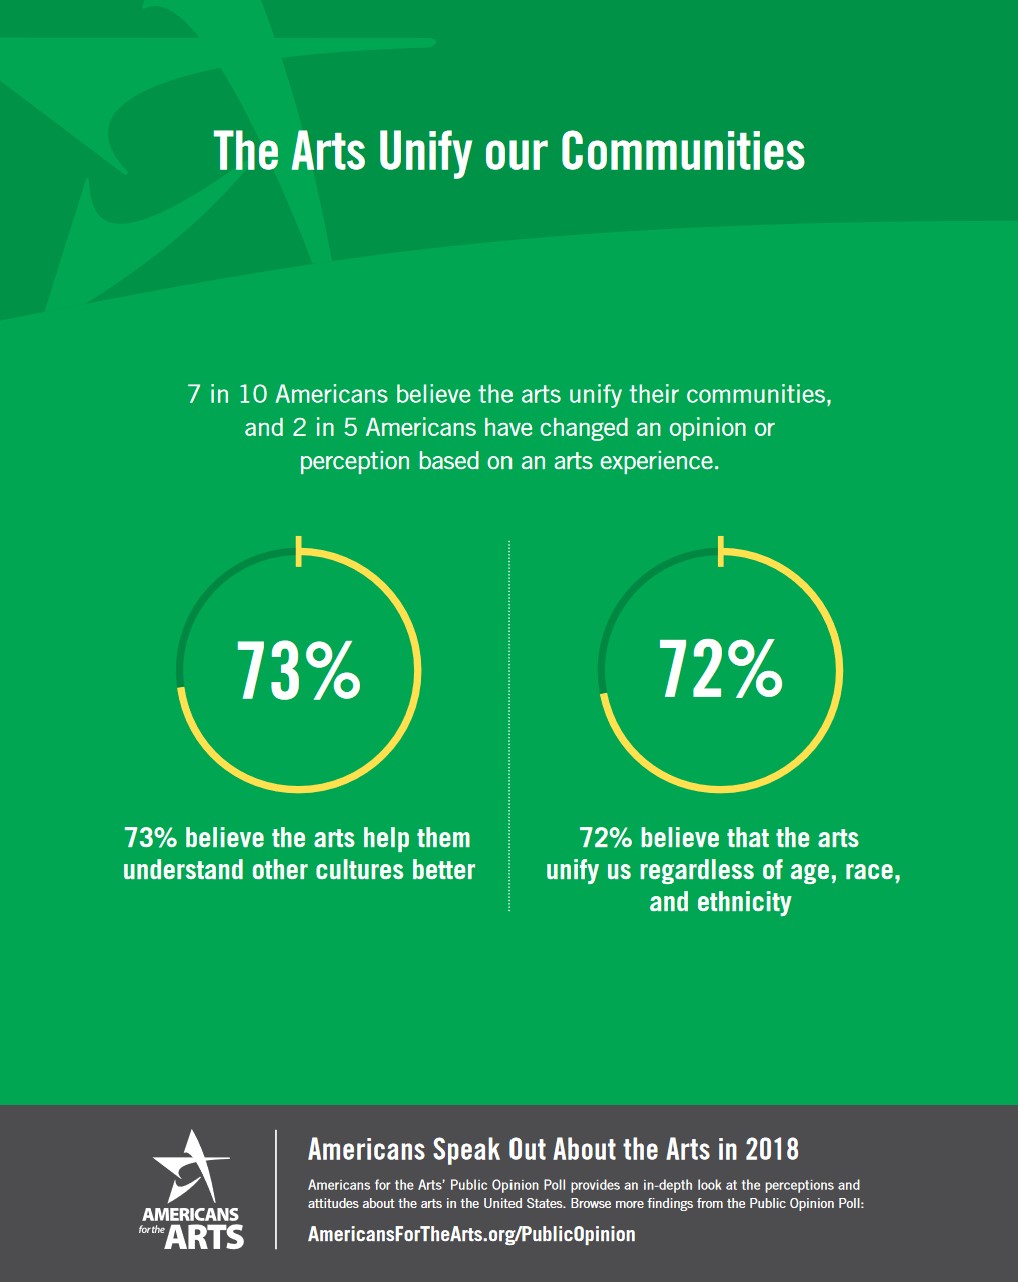 An infographic with a green background with the heading 'The Arts Unify our Communities', with a subheading stating '7 in 10 Americans believe the arts unify their communities'